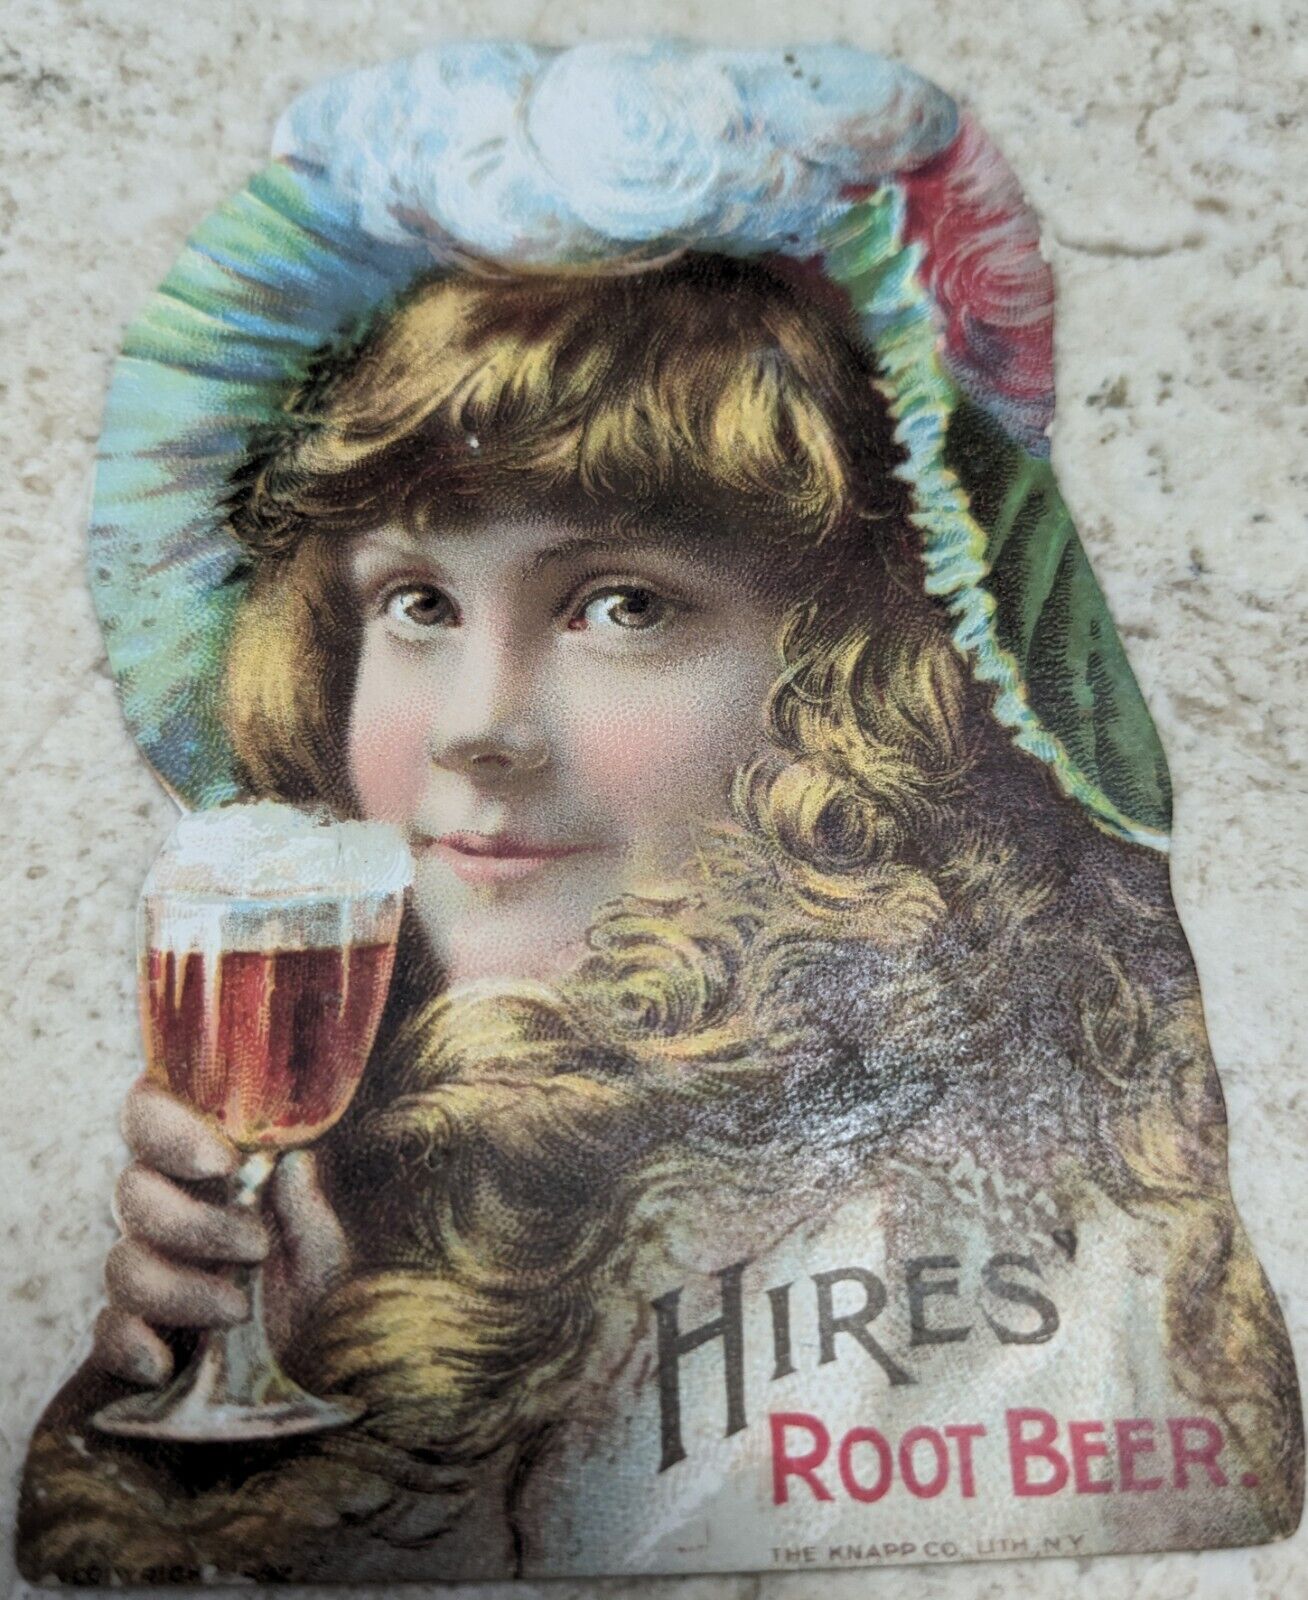 *RARE* VICTORIAN TRADE CARD GORGEOUS GIRL, HIRES ROOT BEER, THE KNAPP CO.